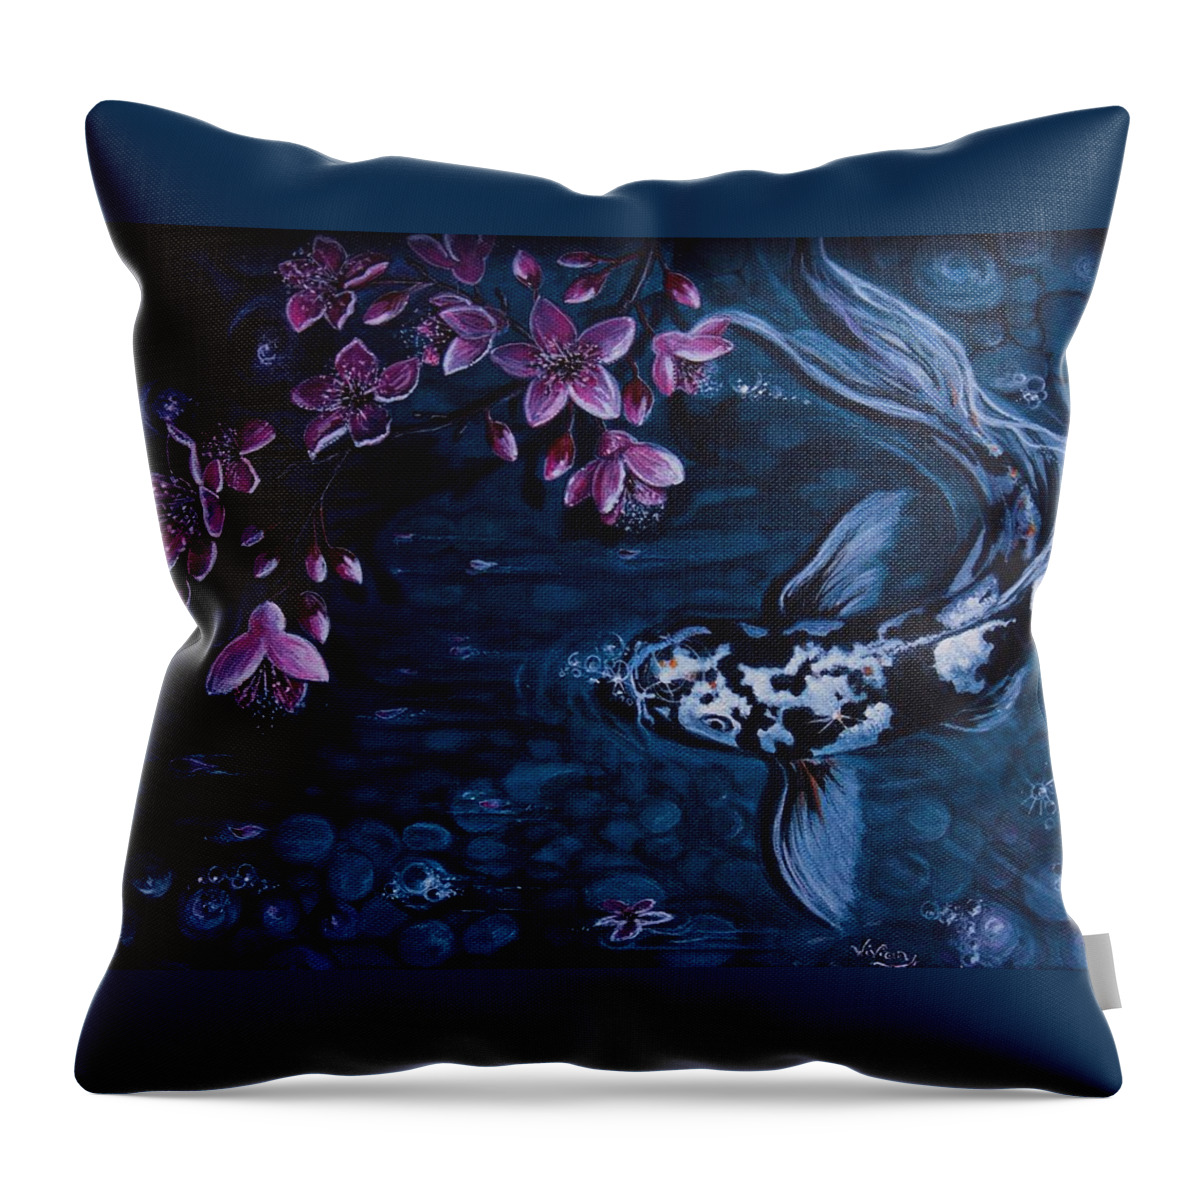 Koi Pond Throw Pillow featuring the painting Moonlit Koi by Vivian Casey Fine Art